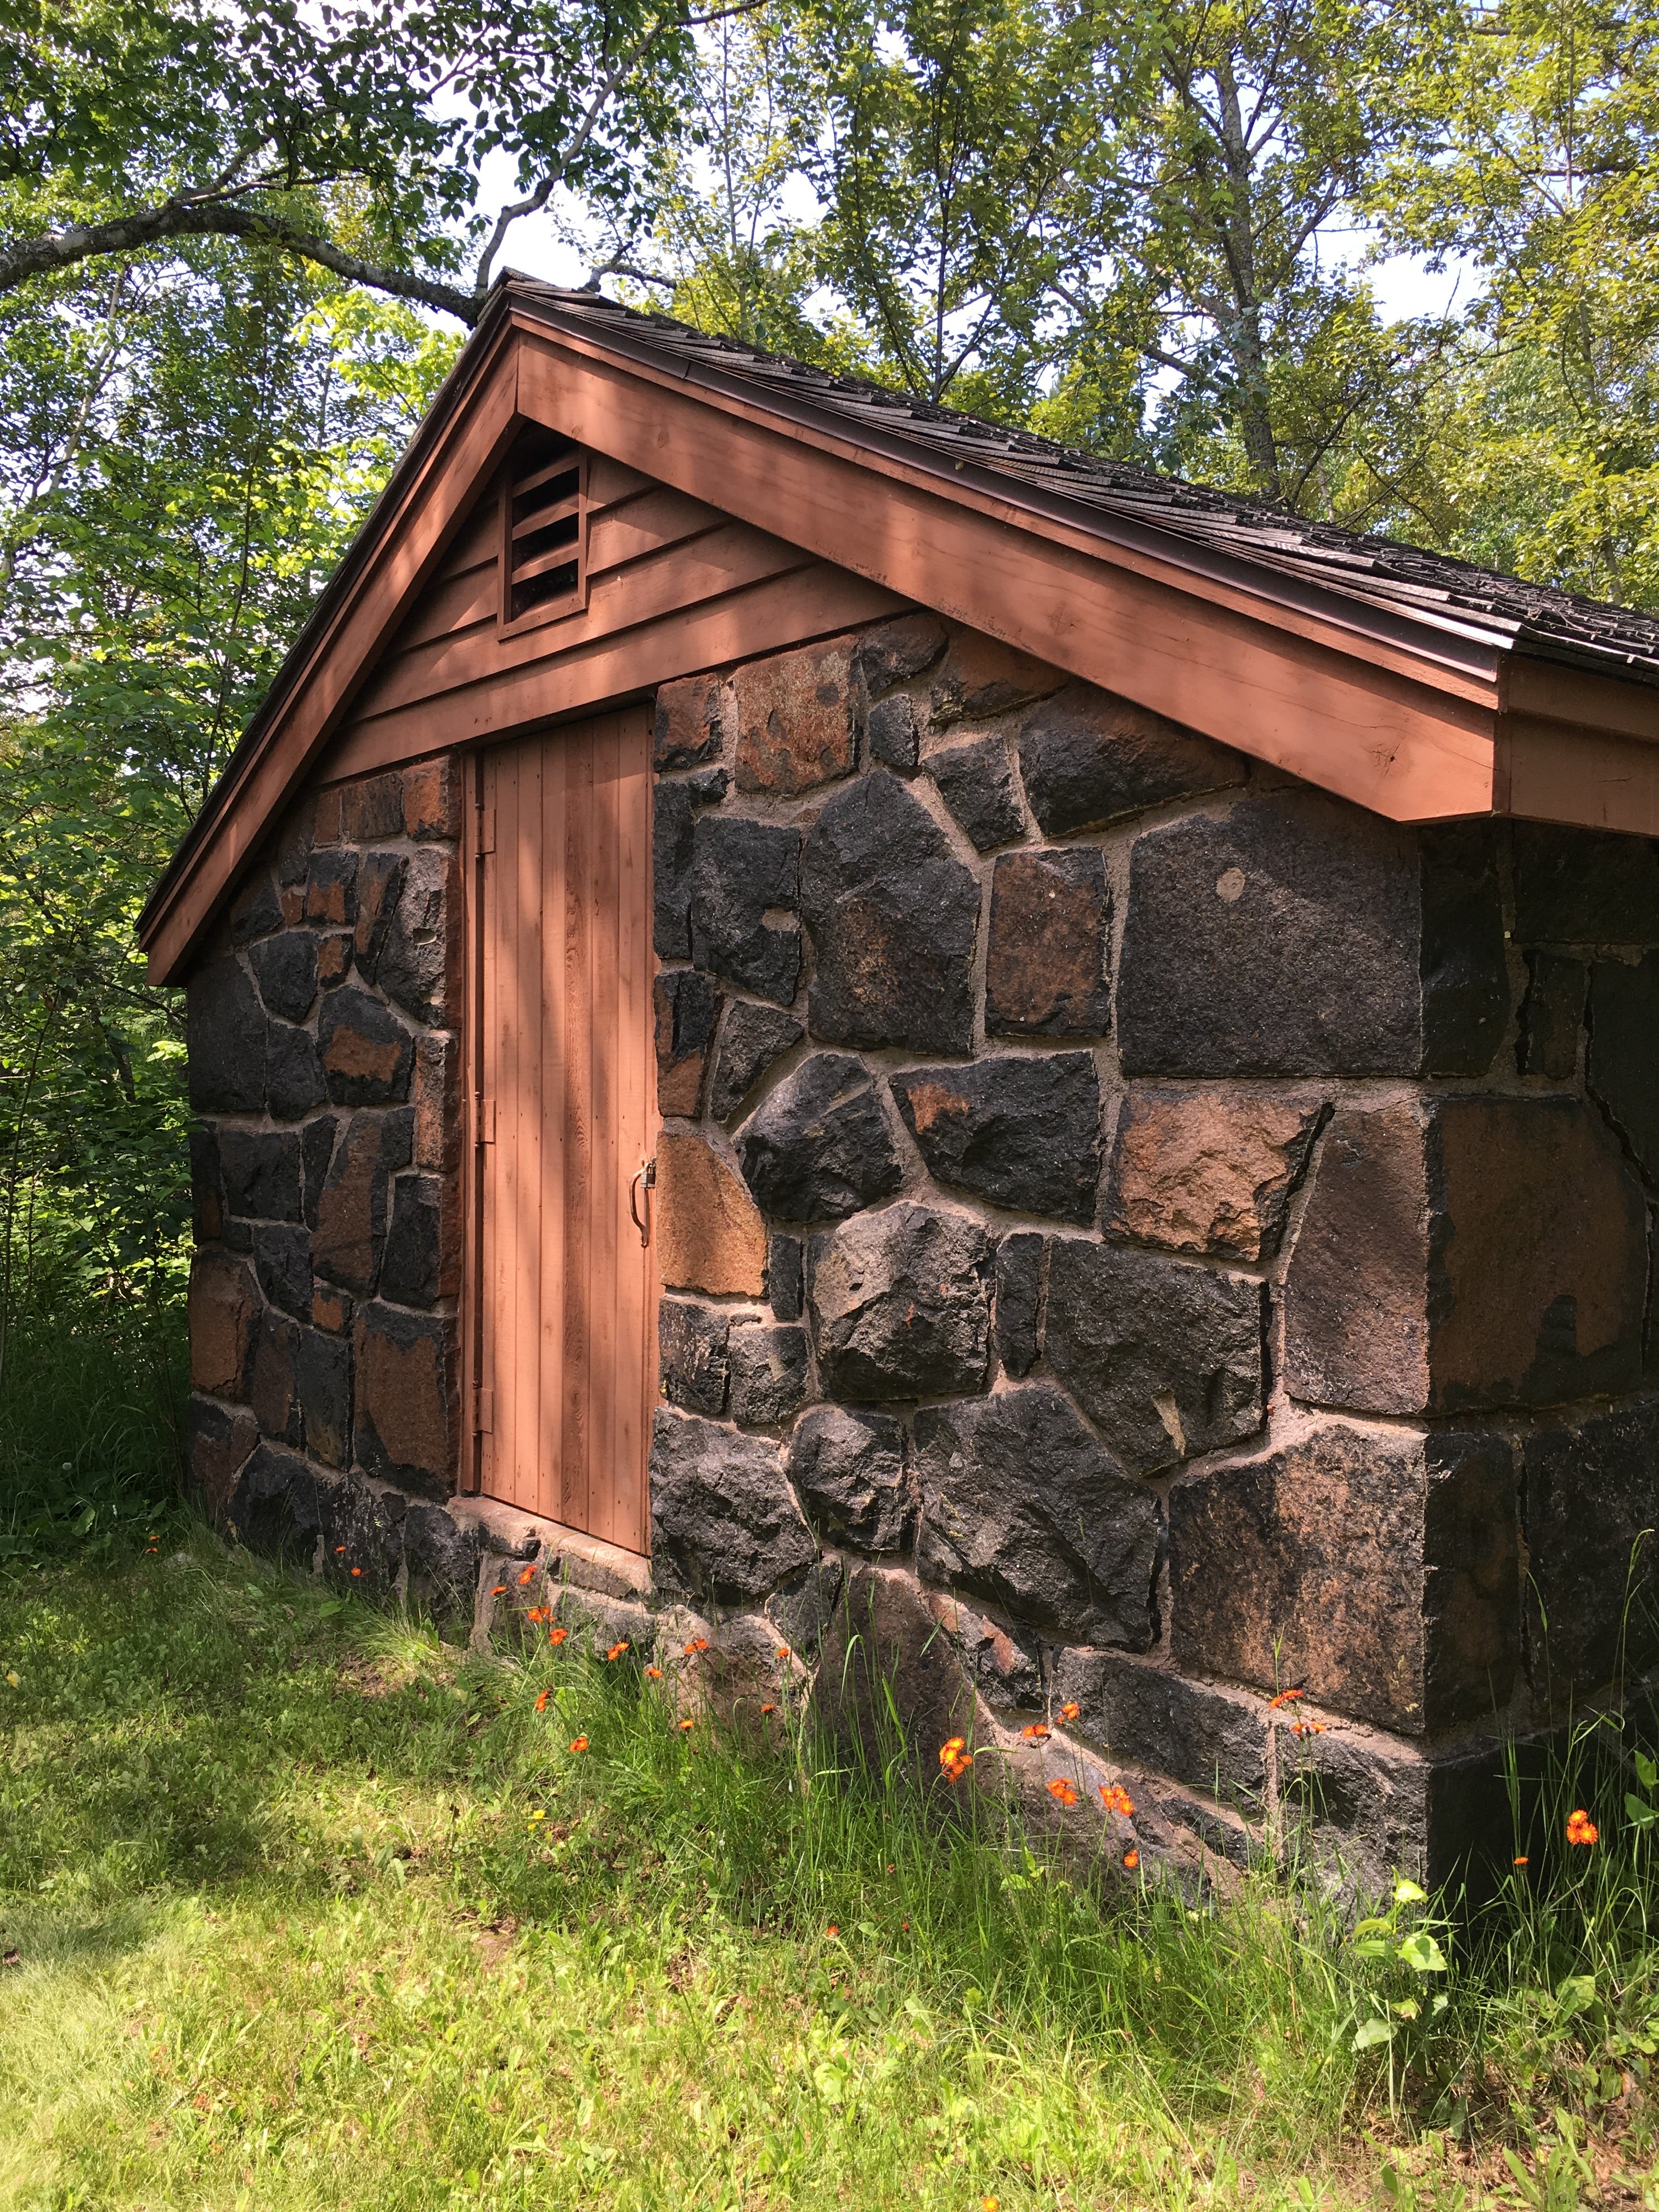 The CCC Ice House is a short hike from the campground